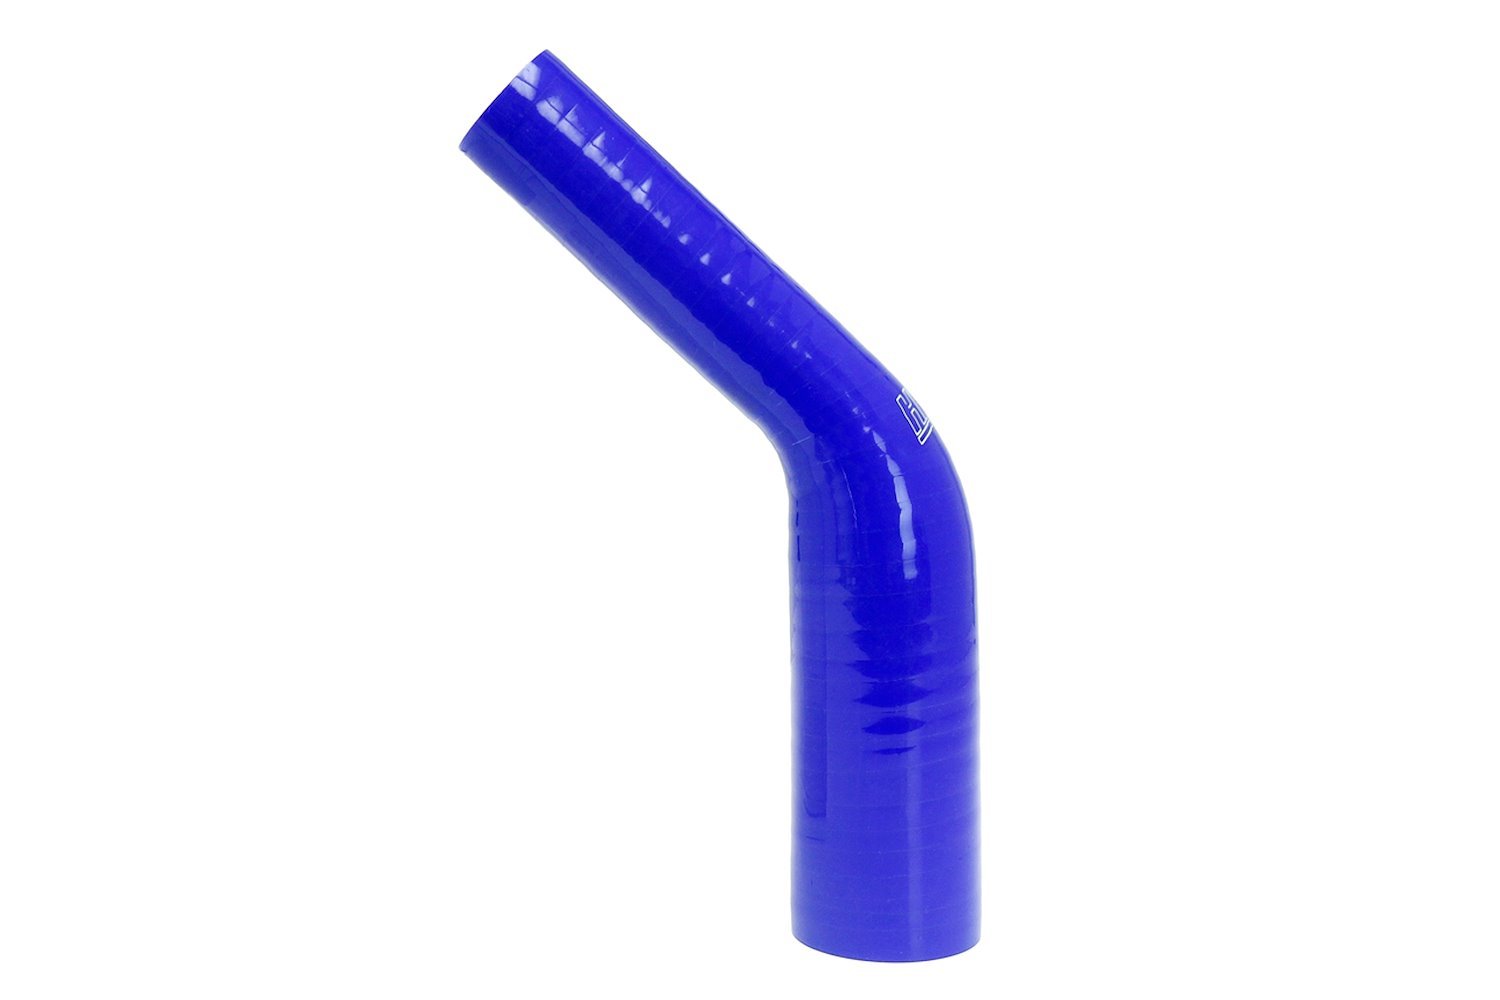 HTSER45-100-125-BLUE Silicone 45-Degree Elbow Hose, High-Temp 4-Ply Reinforced, 1 in. - 1-1/4 in. ID, Blue